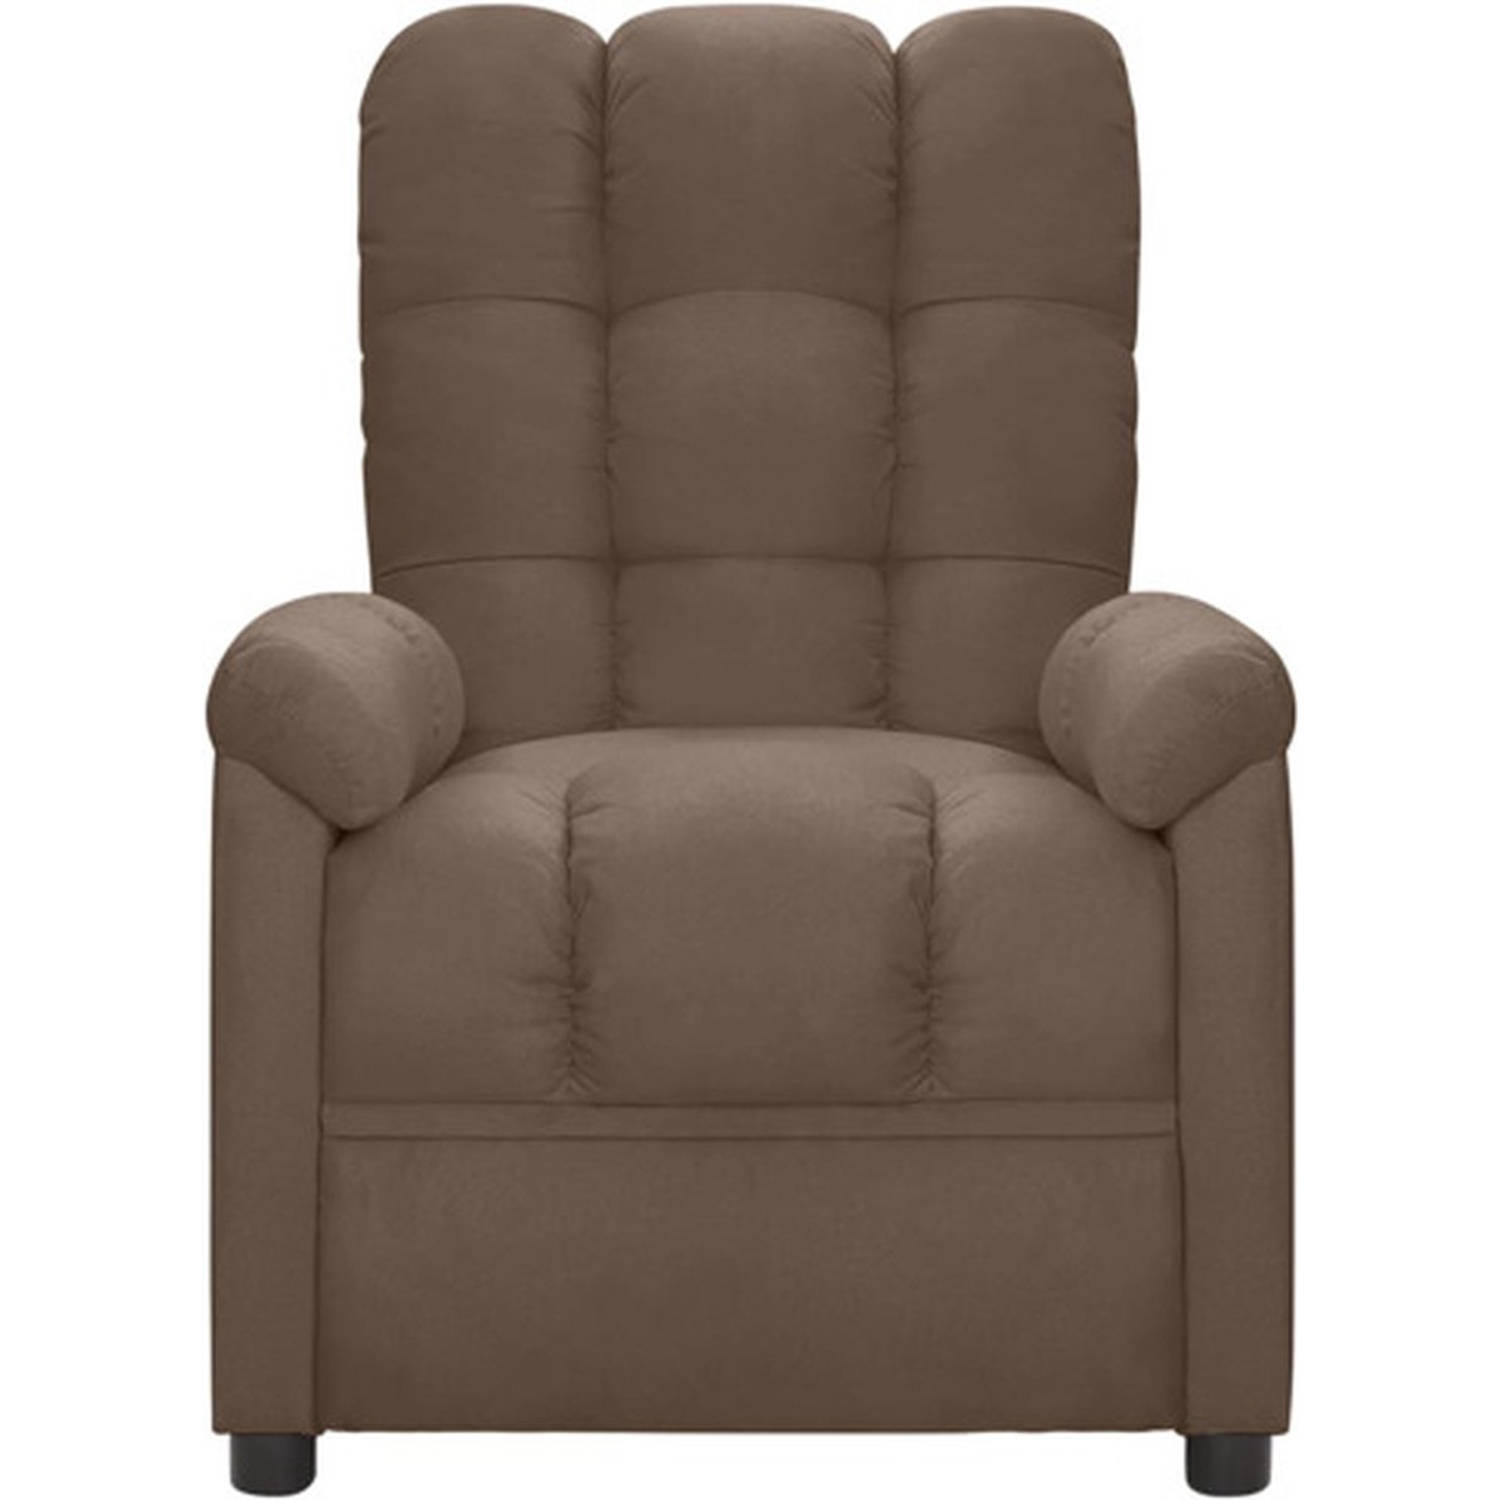 The Living Store Verstelbare Stoel - Fauteuil - Stof - IJzeren frame - Taupe - 74 x 99 x 102 cm